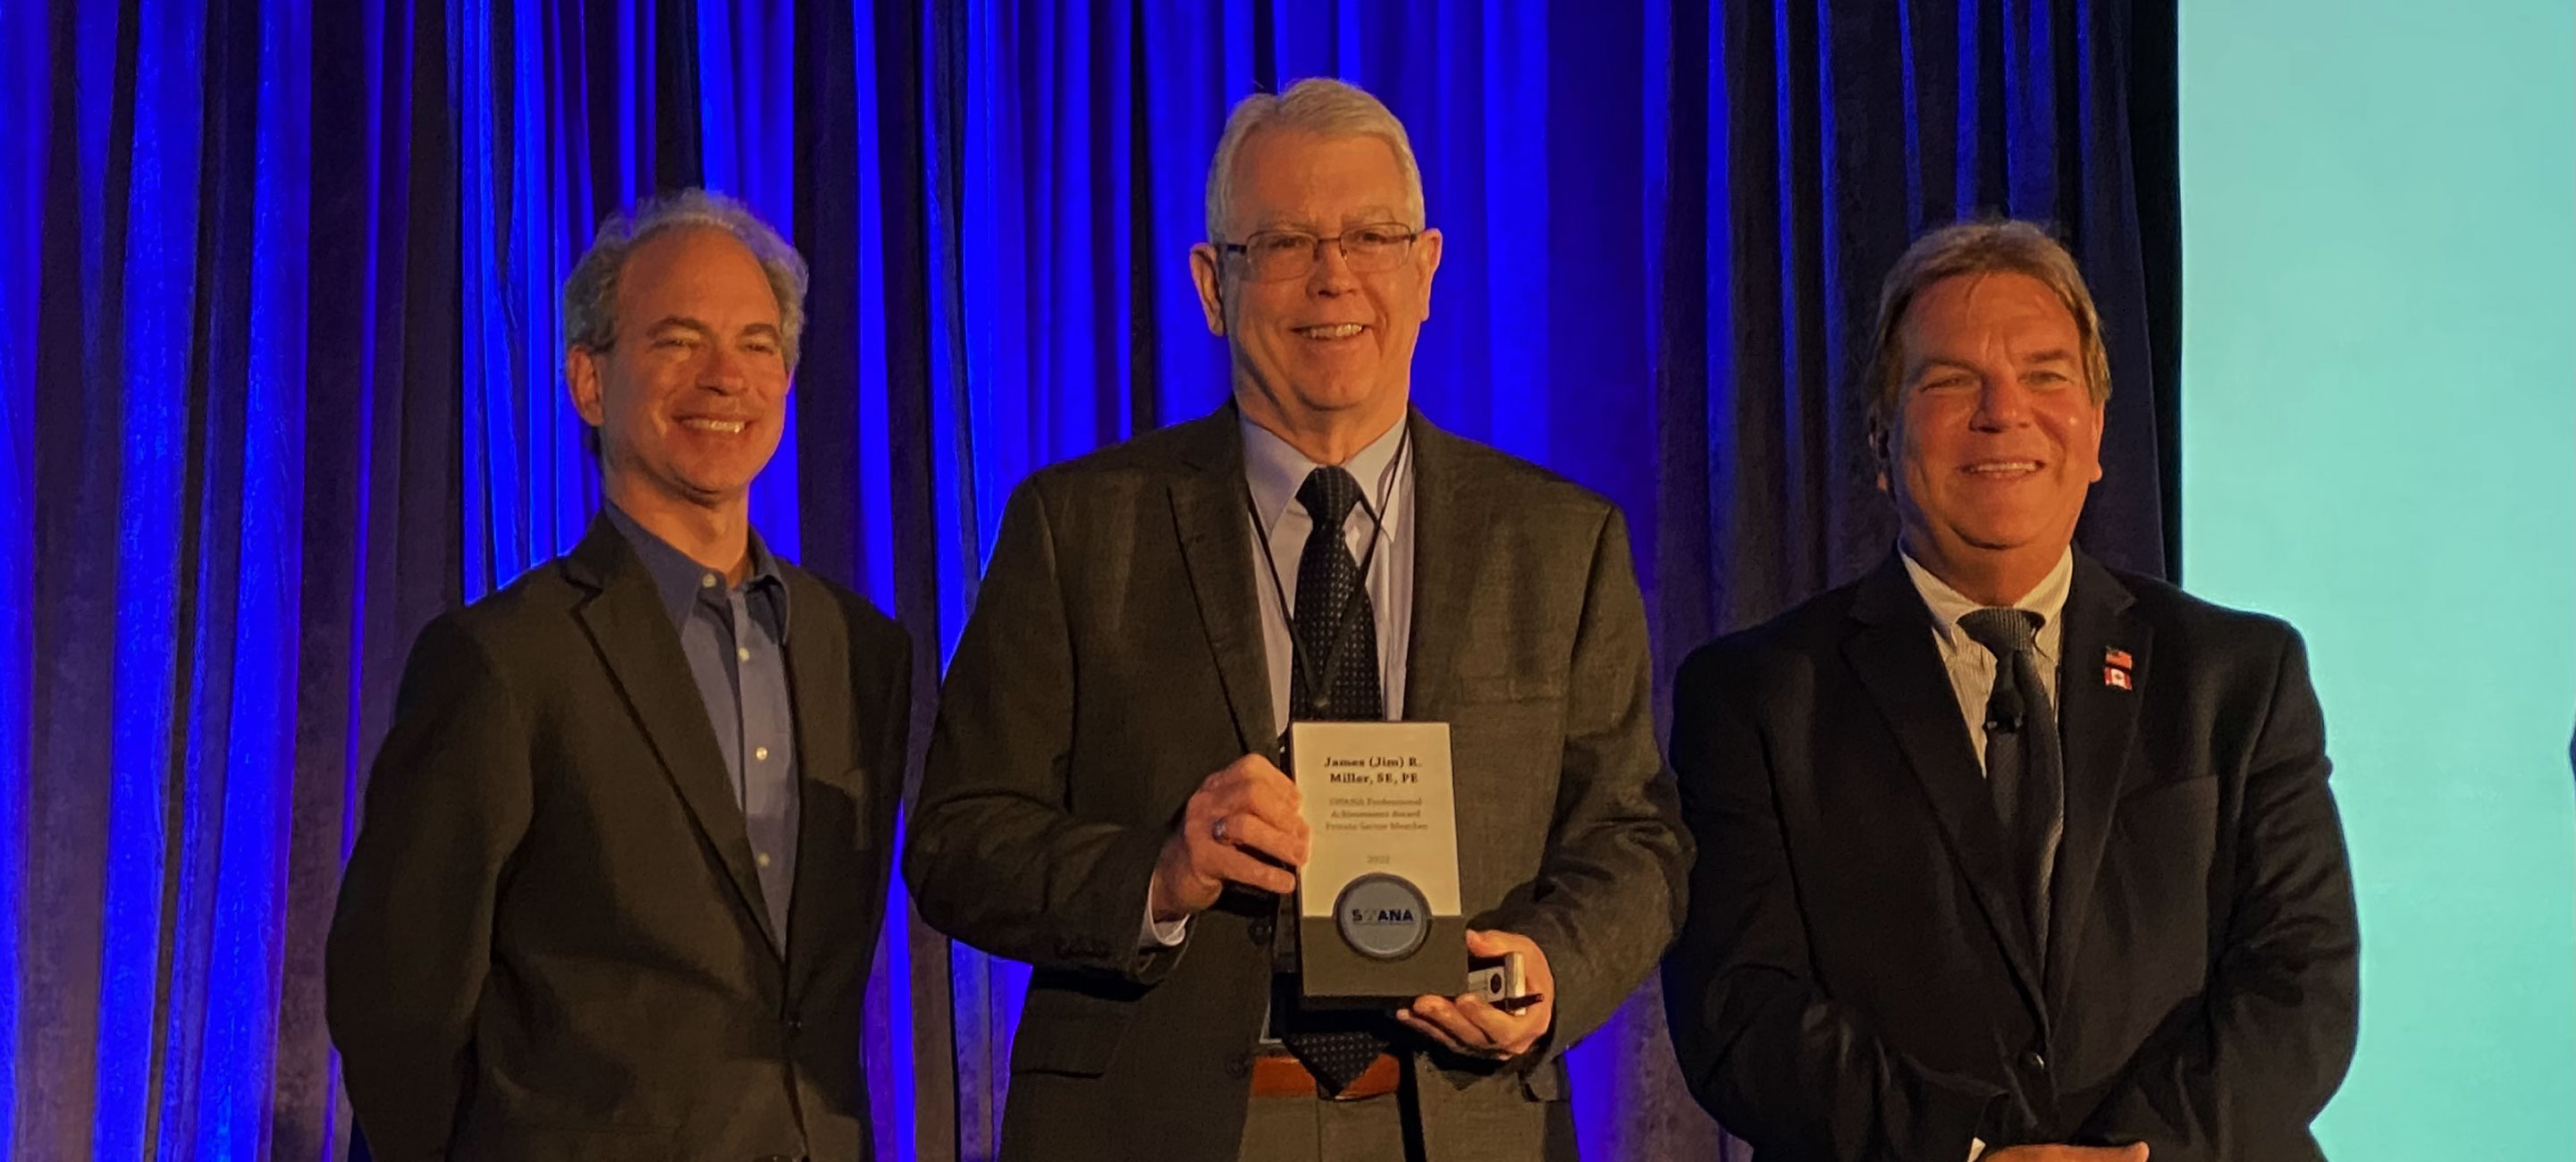 JRMA’s CEO and Founder Receives SWANA’s 2022 Professional Achievement Award